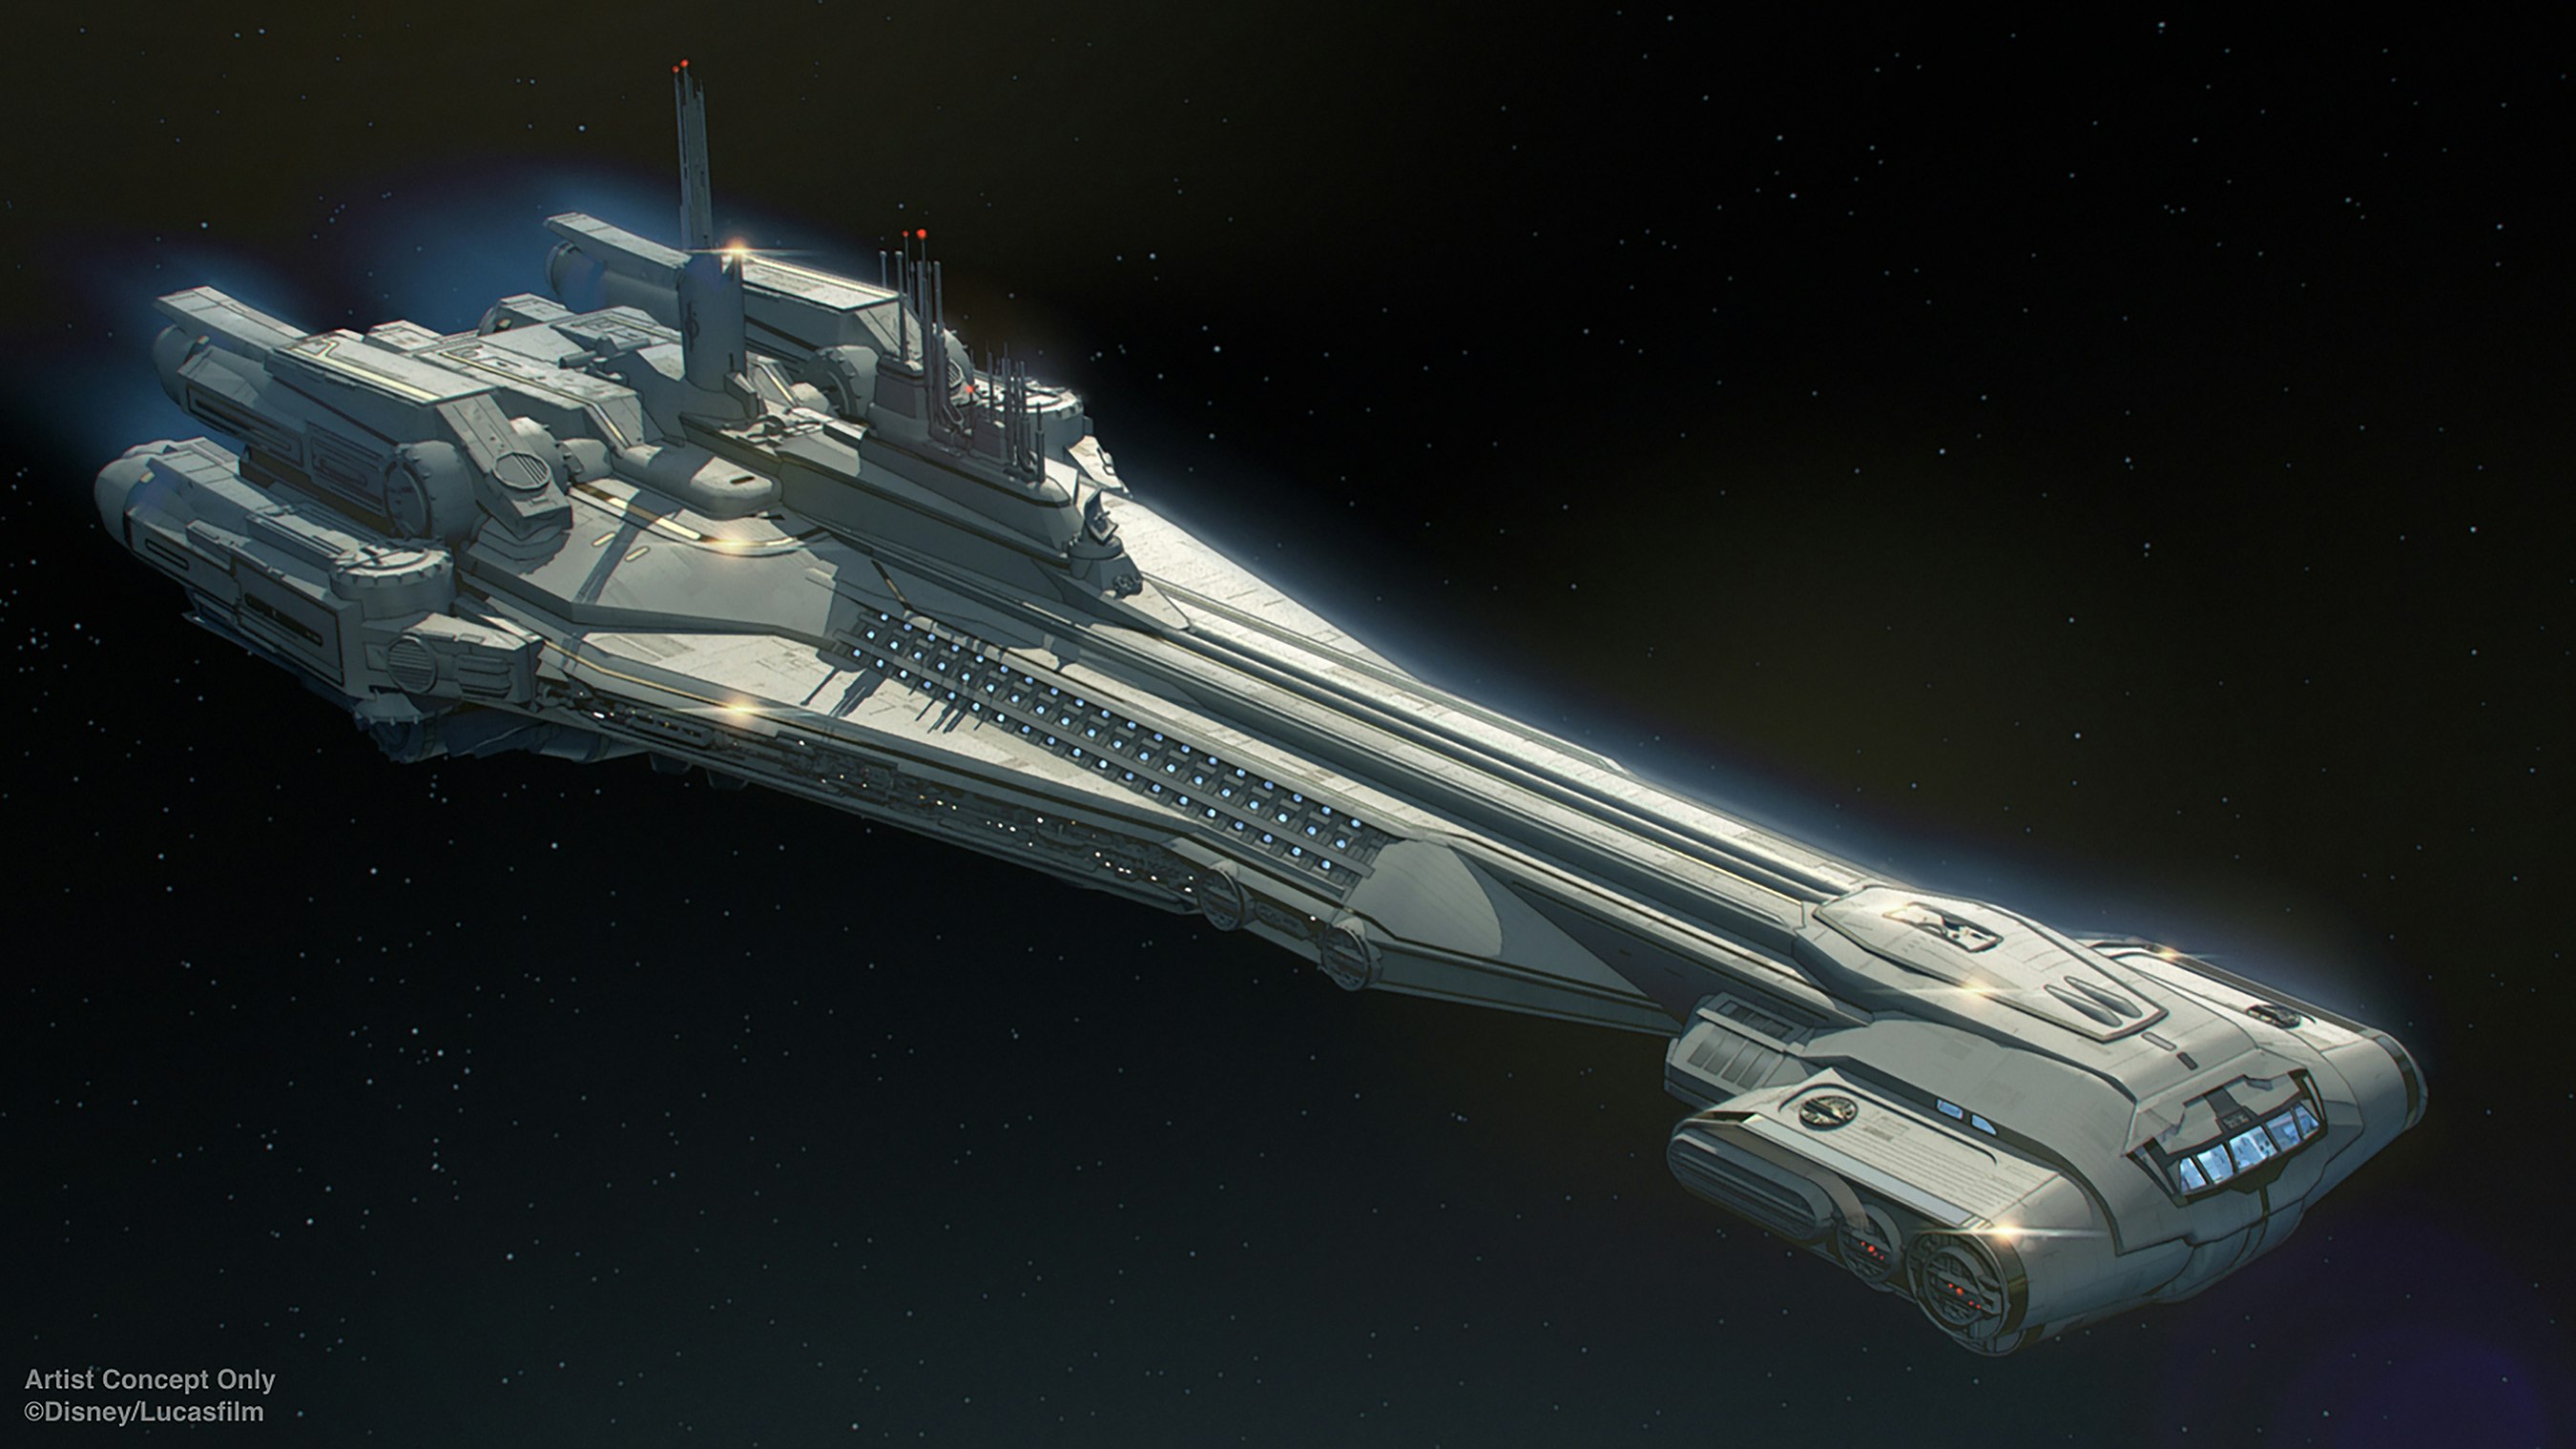 A rendering of a Star Wars cruise liner in space